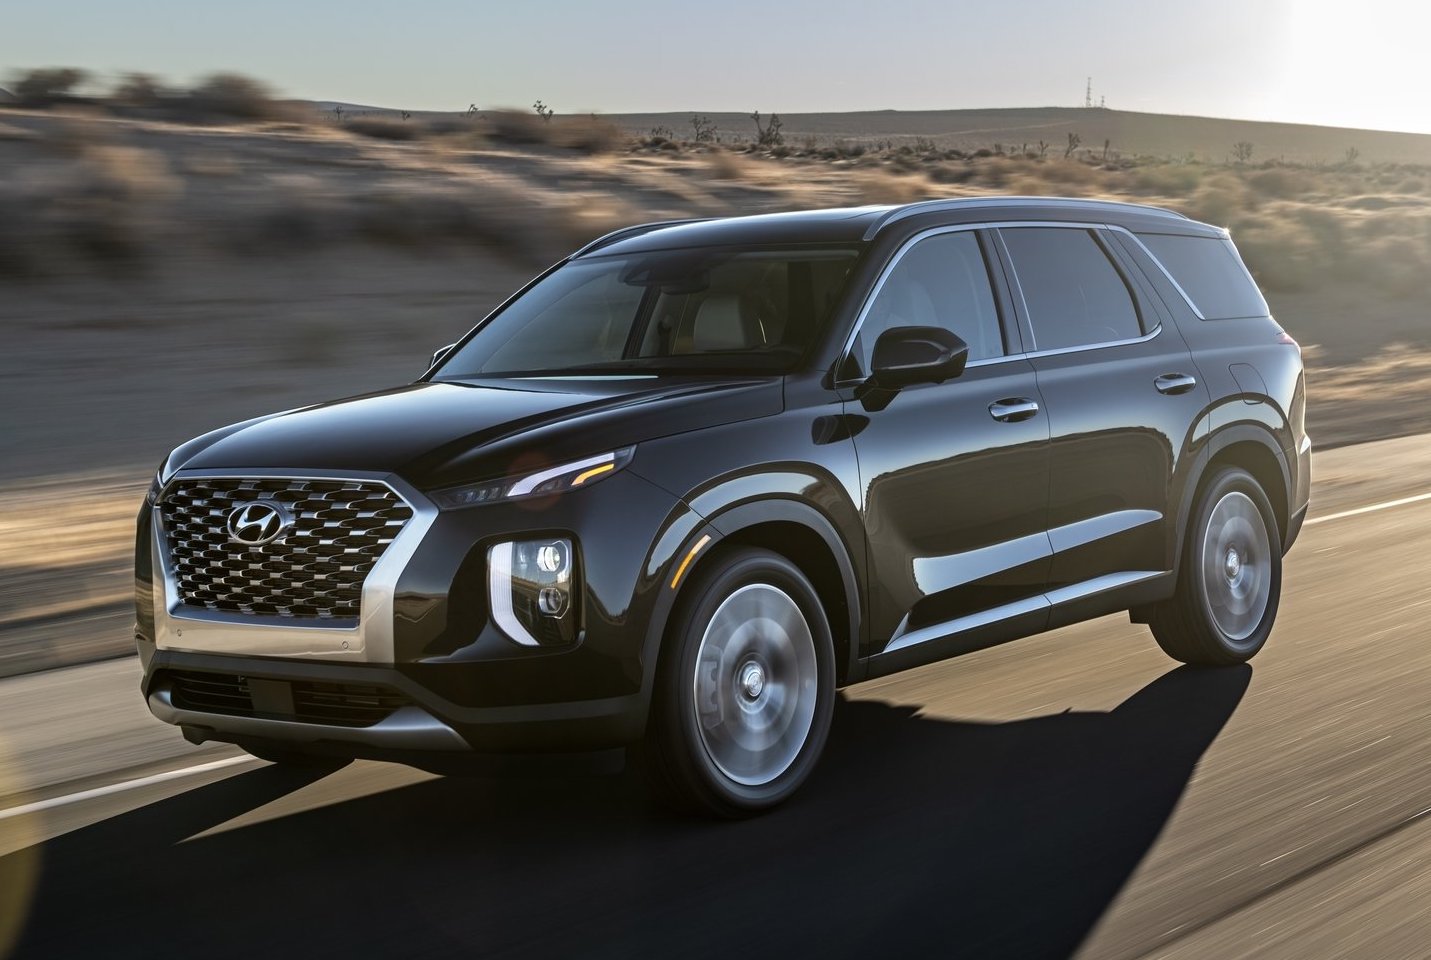 Hyundai Palisade to go on sale in Australia in 2020